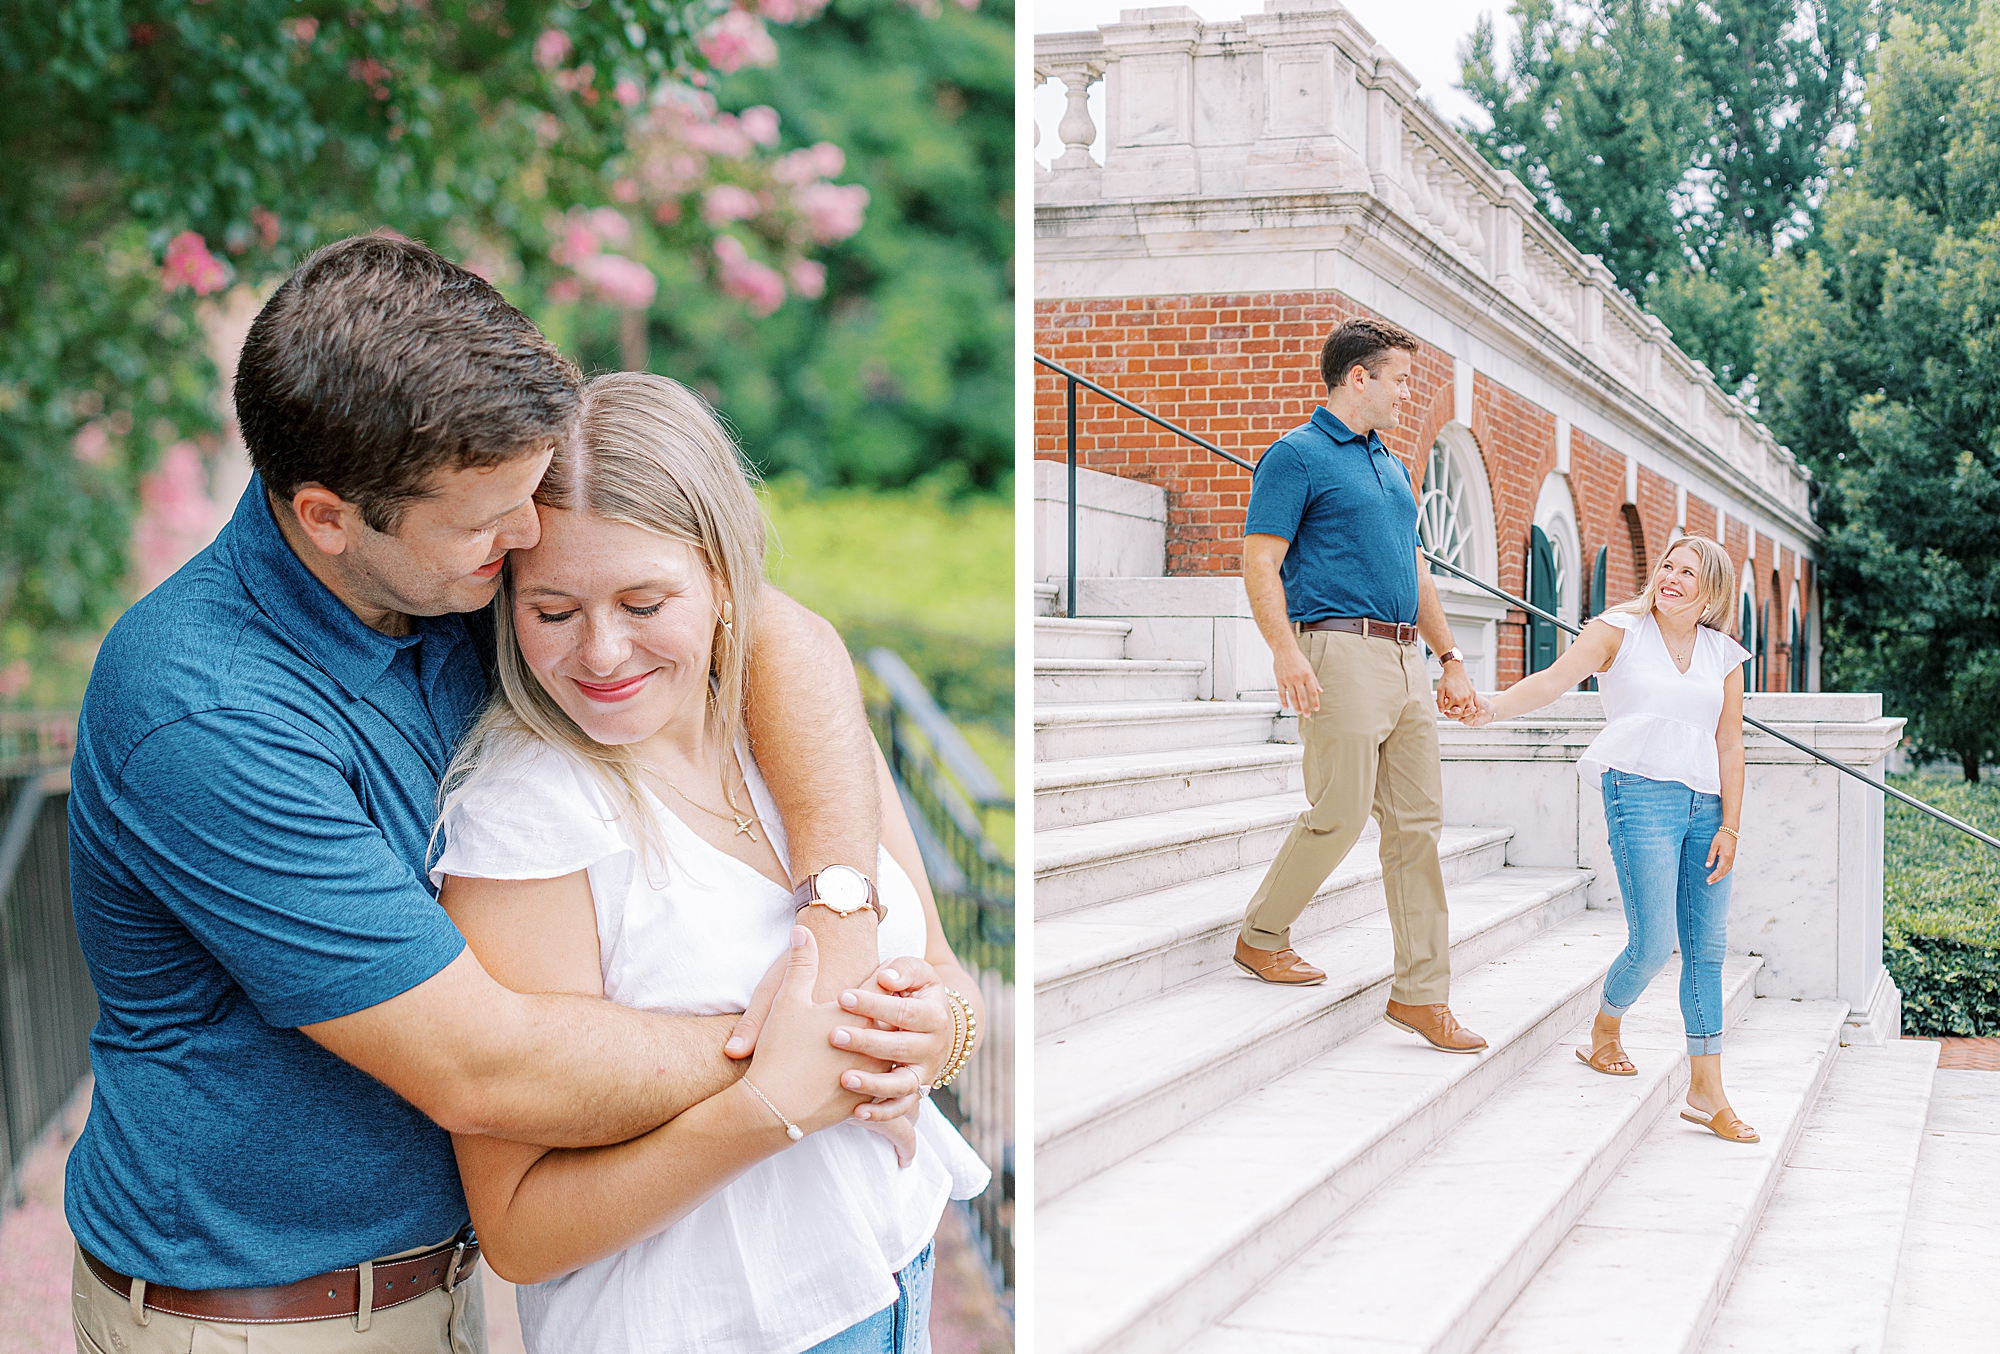 Portraits of couple during summer time engagement session.